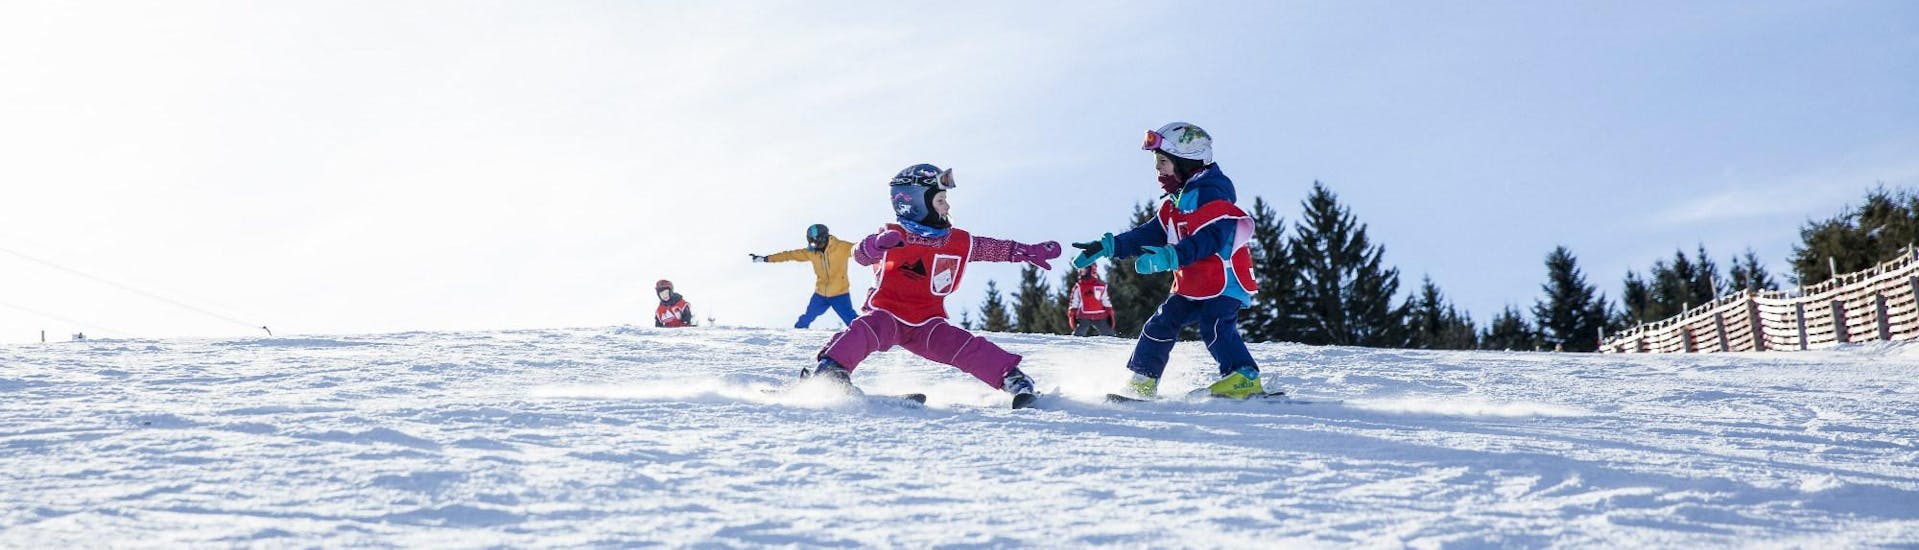 Private Ski Lessons for Kids in Sinswang - All Levels.